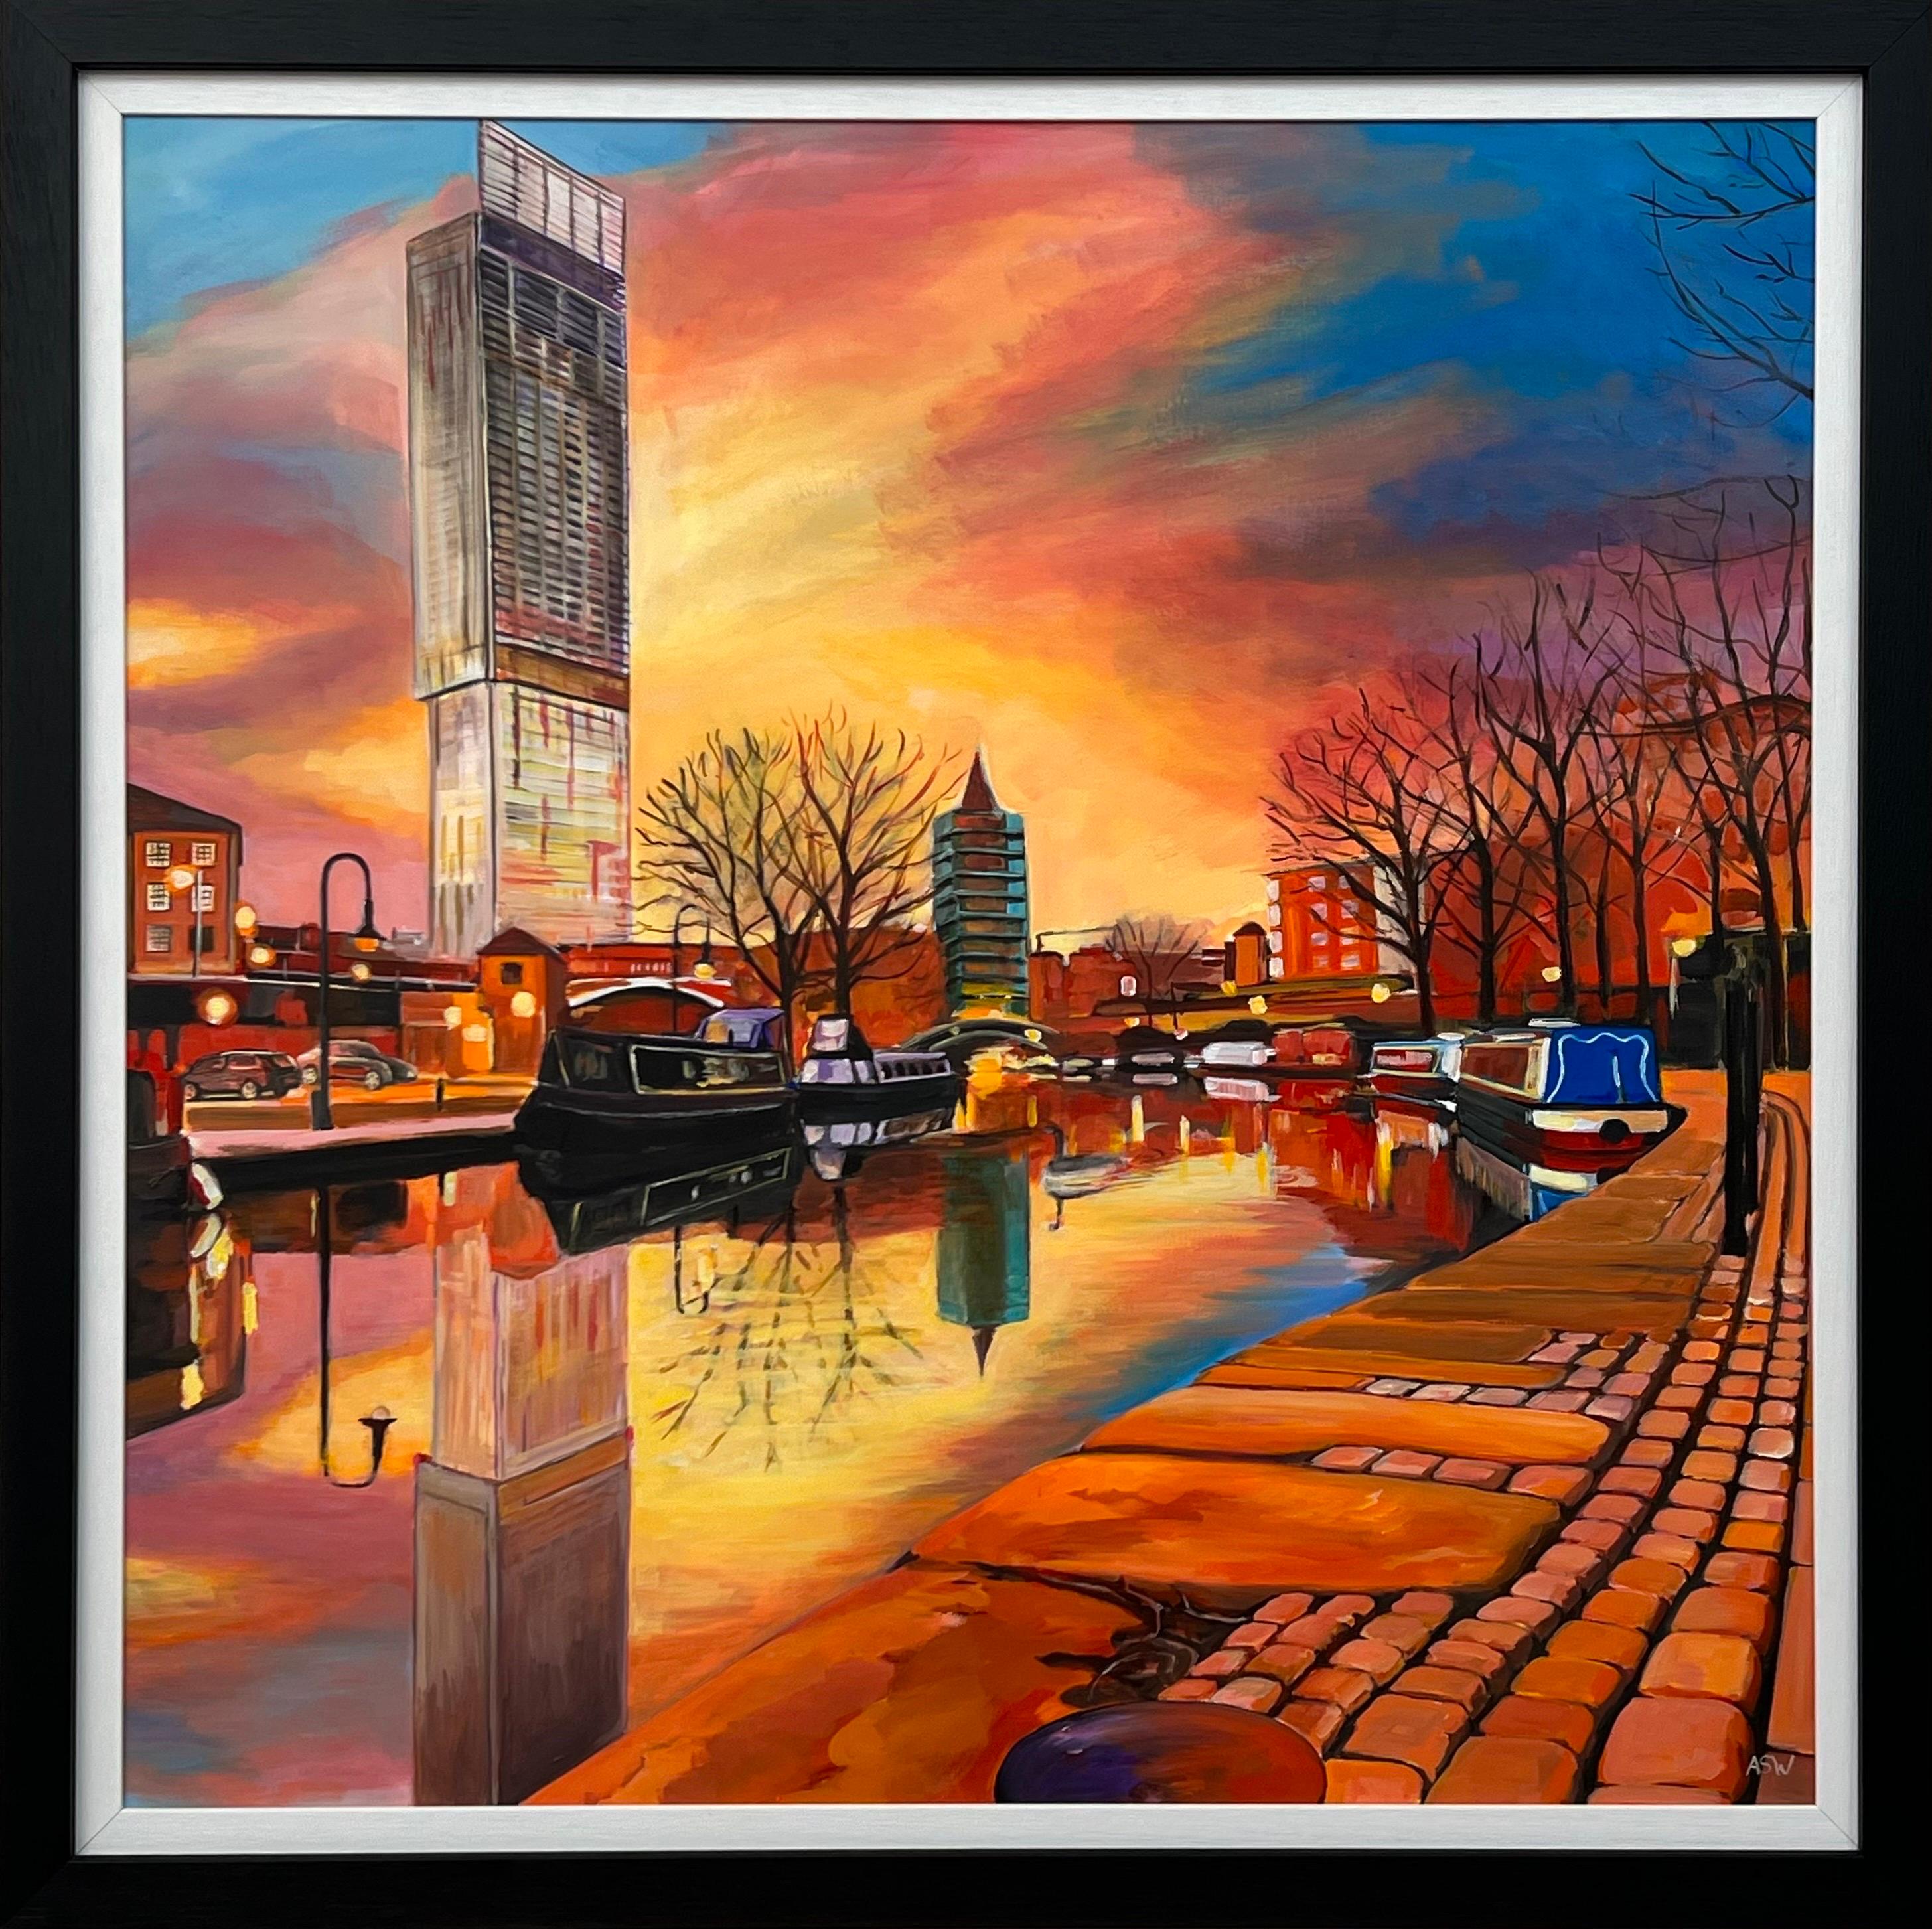 Angela Wakefield Landscape Painting - Bridgewater Canal Manchester Industrial City by Contemporary British Artist